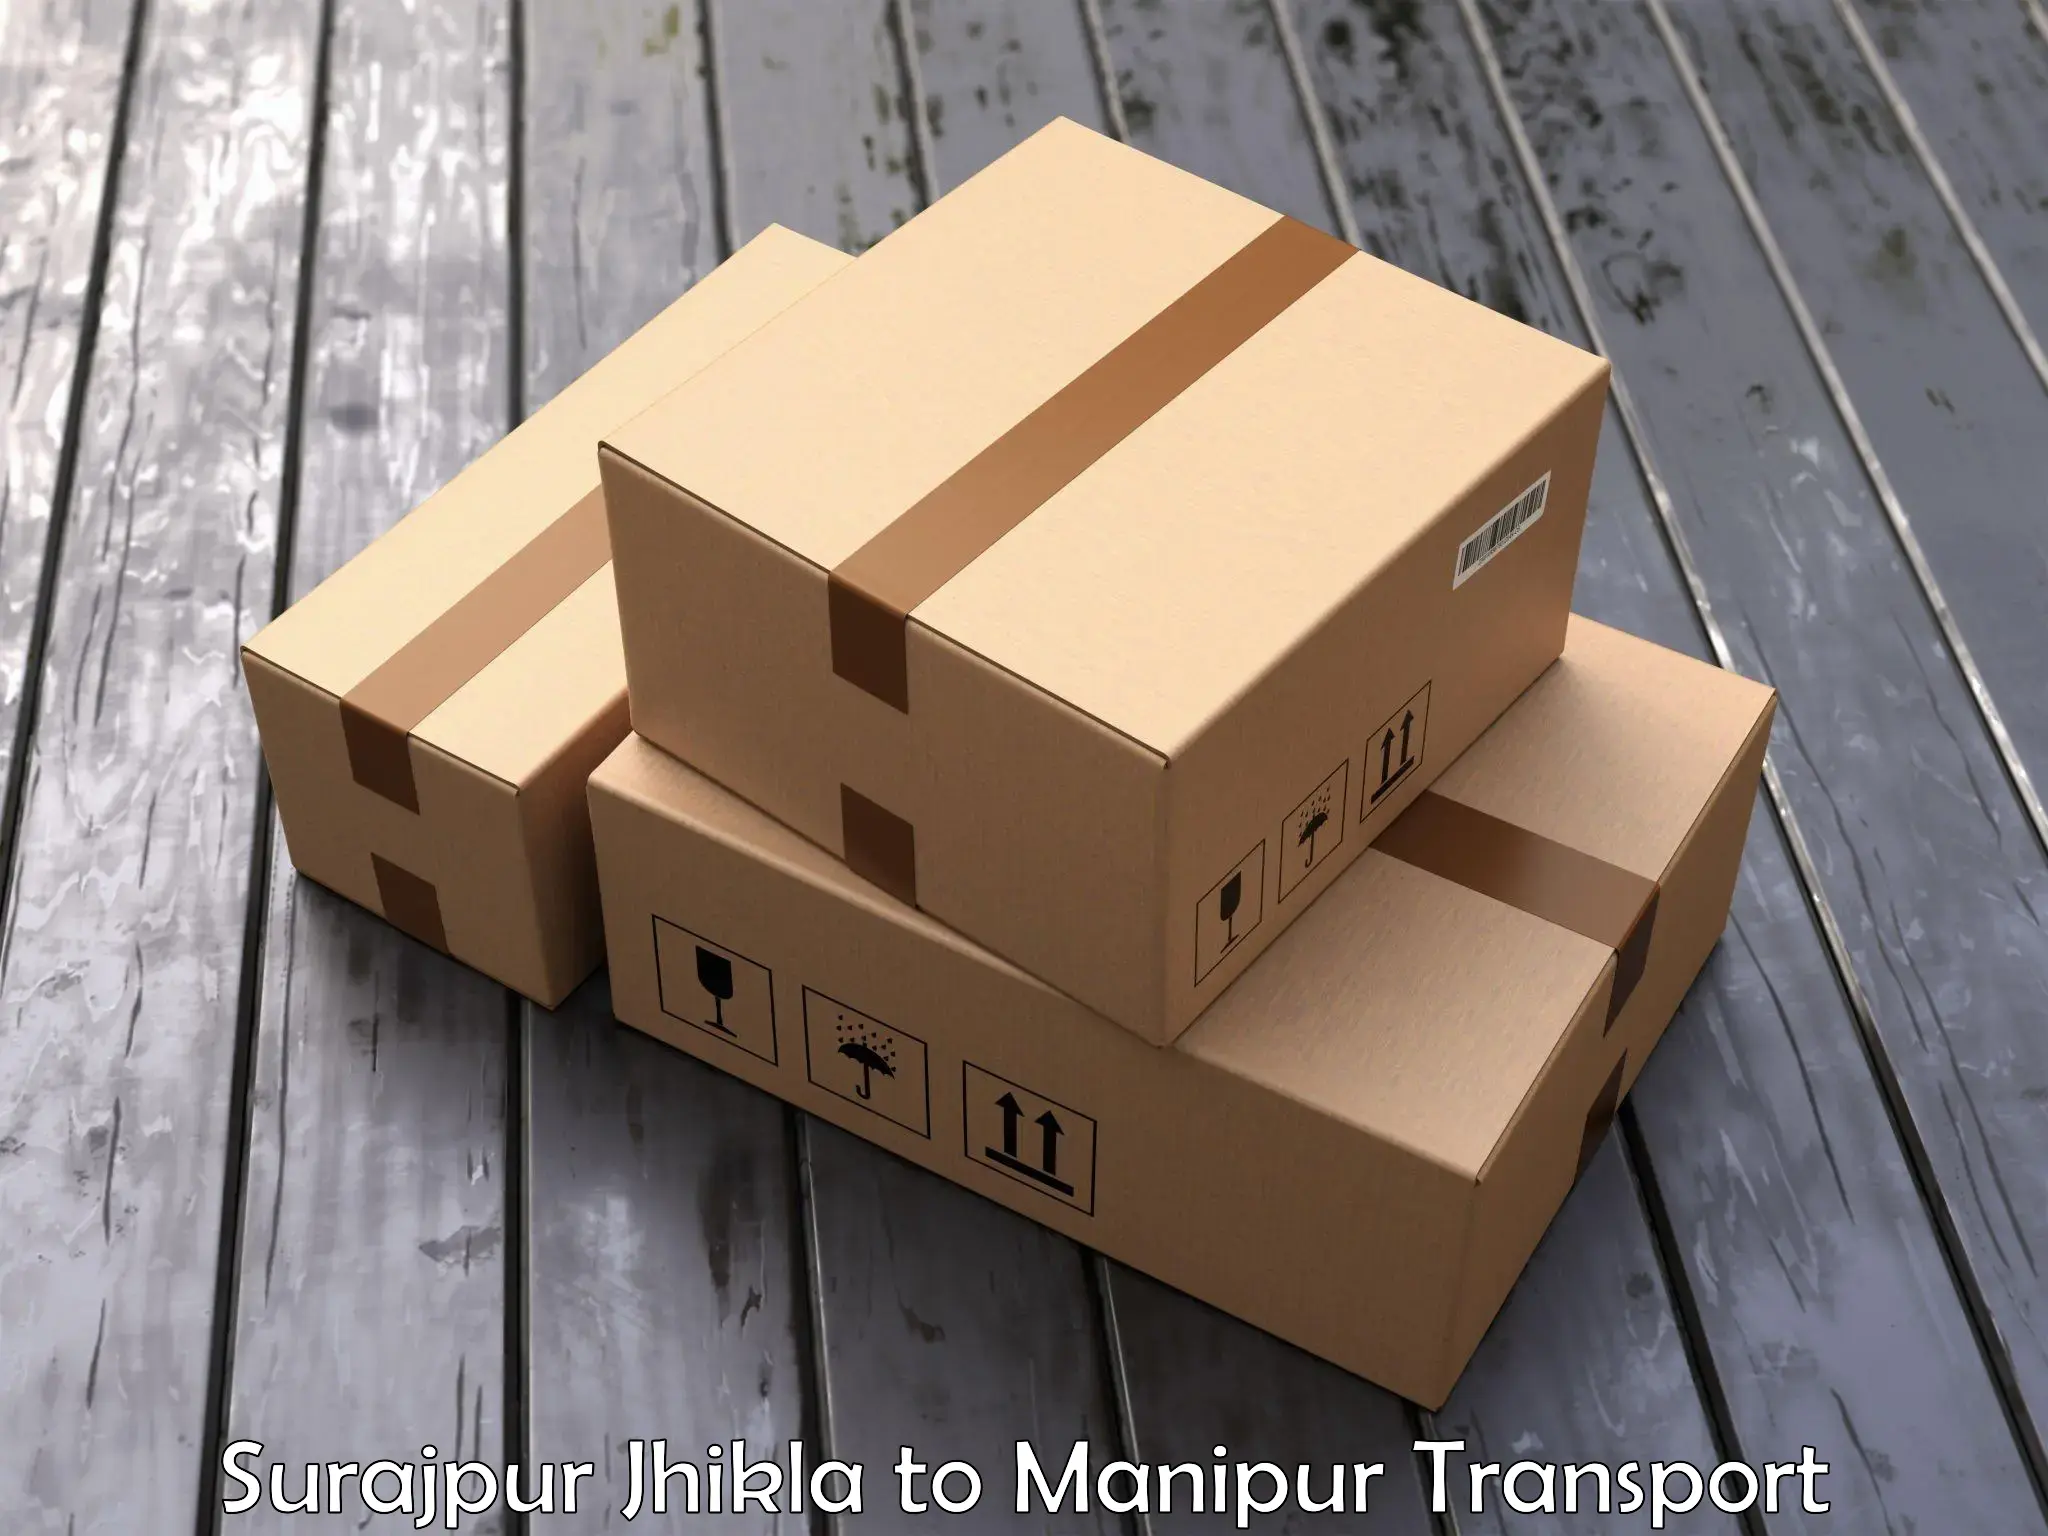 Luggage transport services Surajpur Jhikla to Imphal